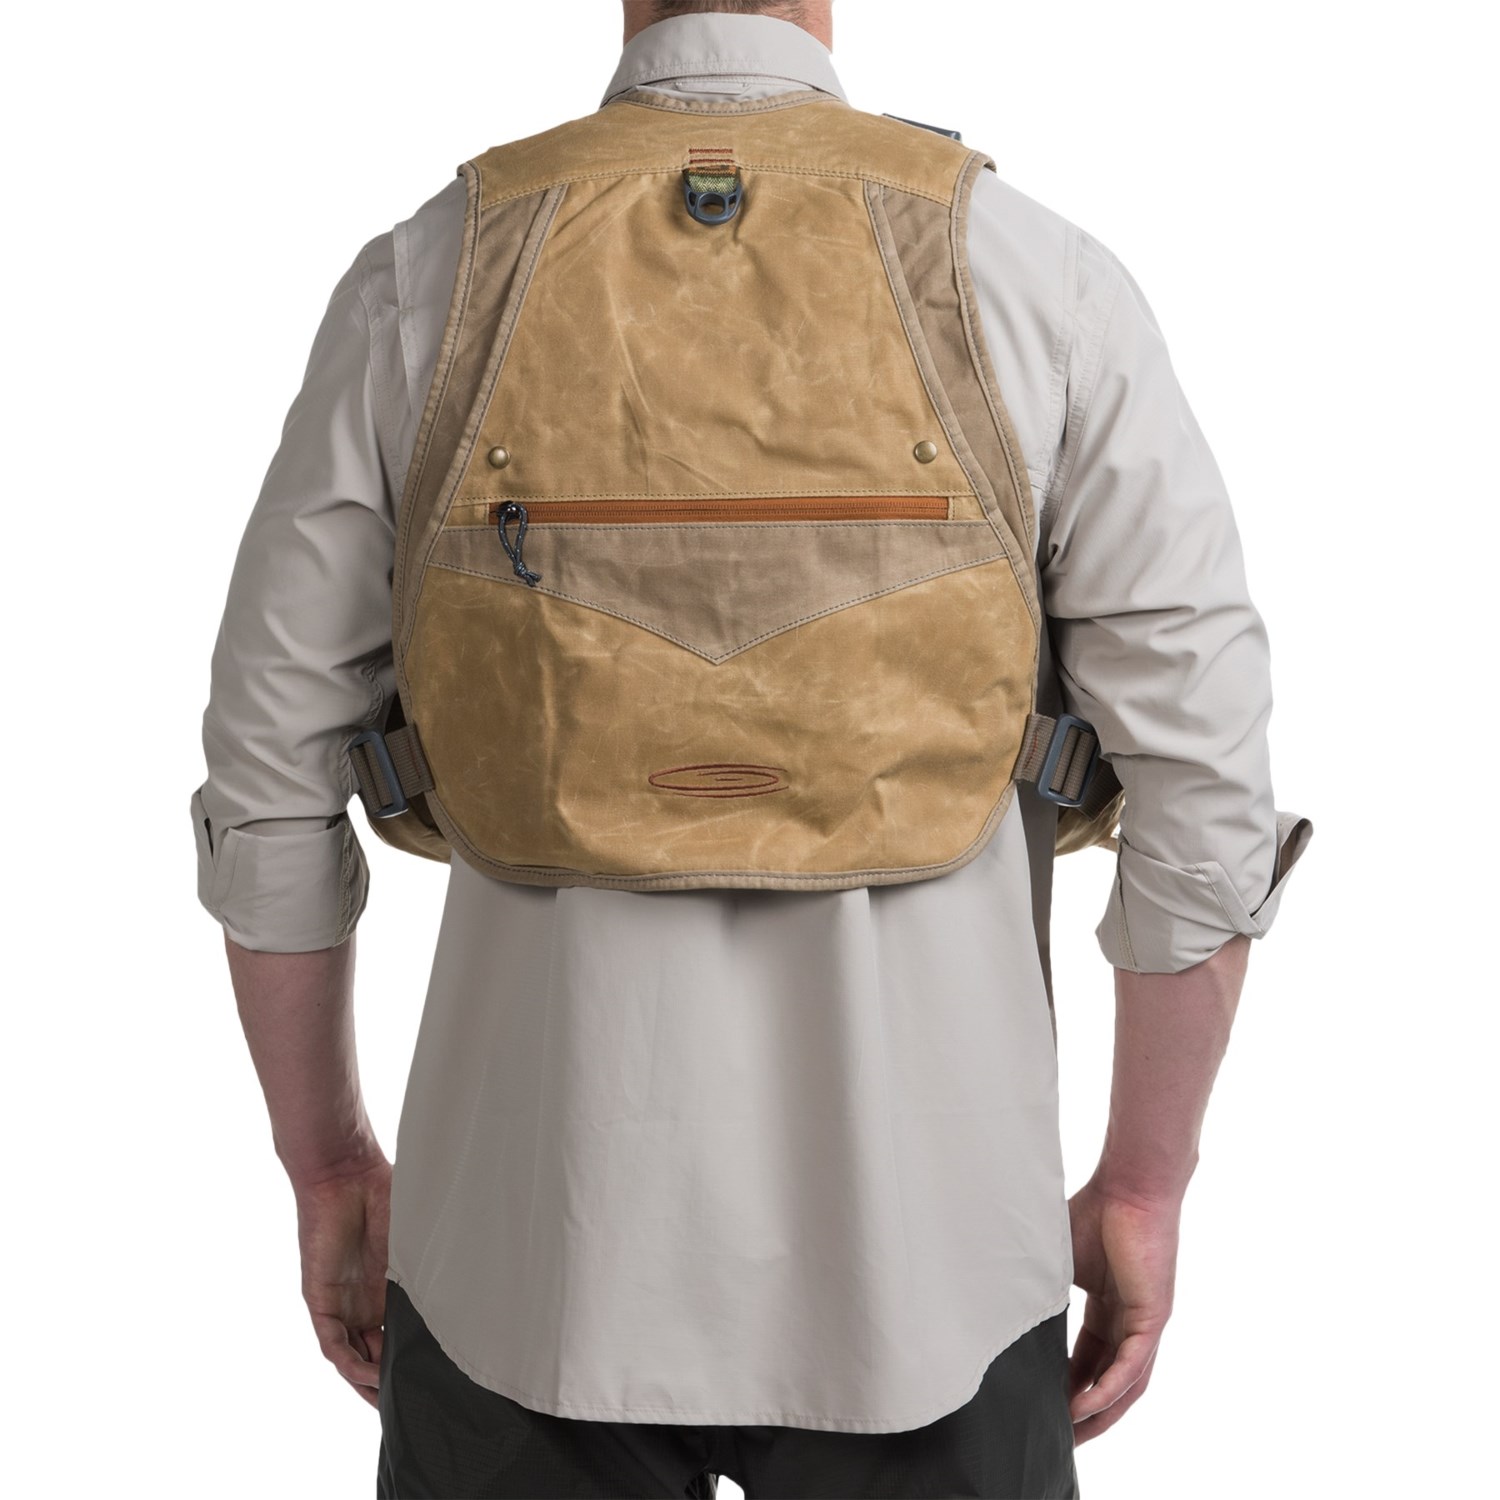 Fishpond Fishpond Vaquero Tech Pack Vest - Waxed Cotton海淘返利